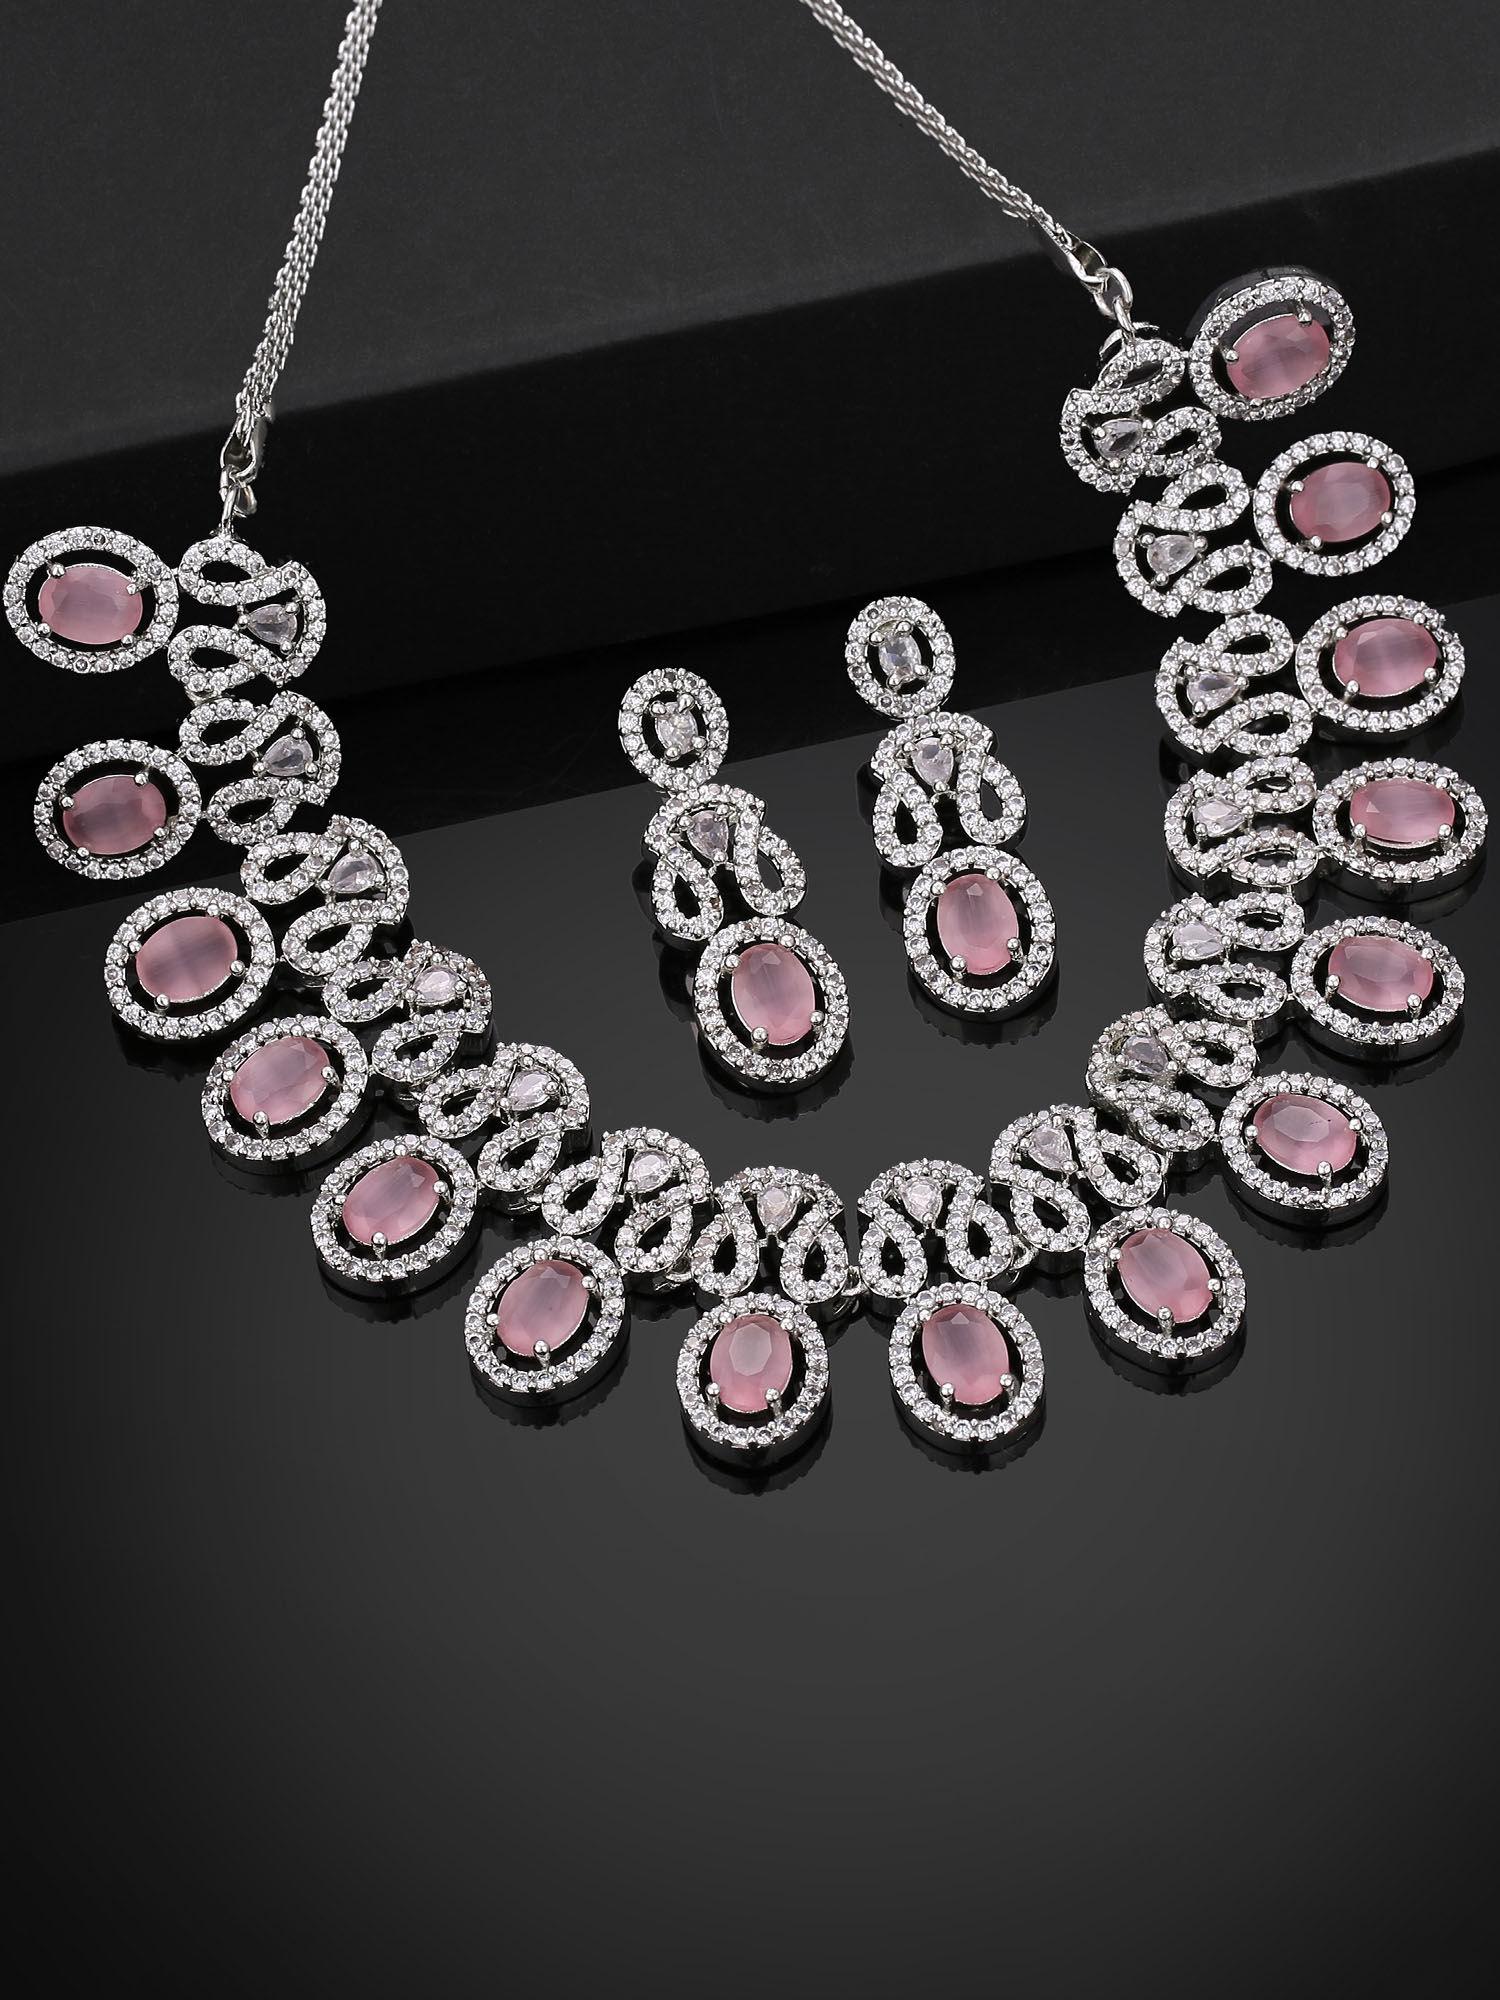 rhodium plated cz beautiful necklace set with ruby crystals